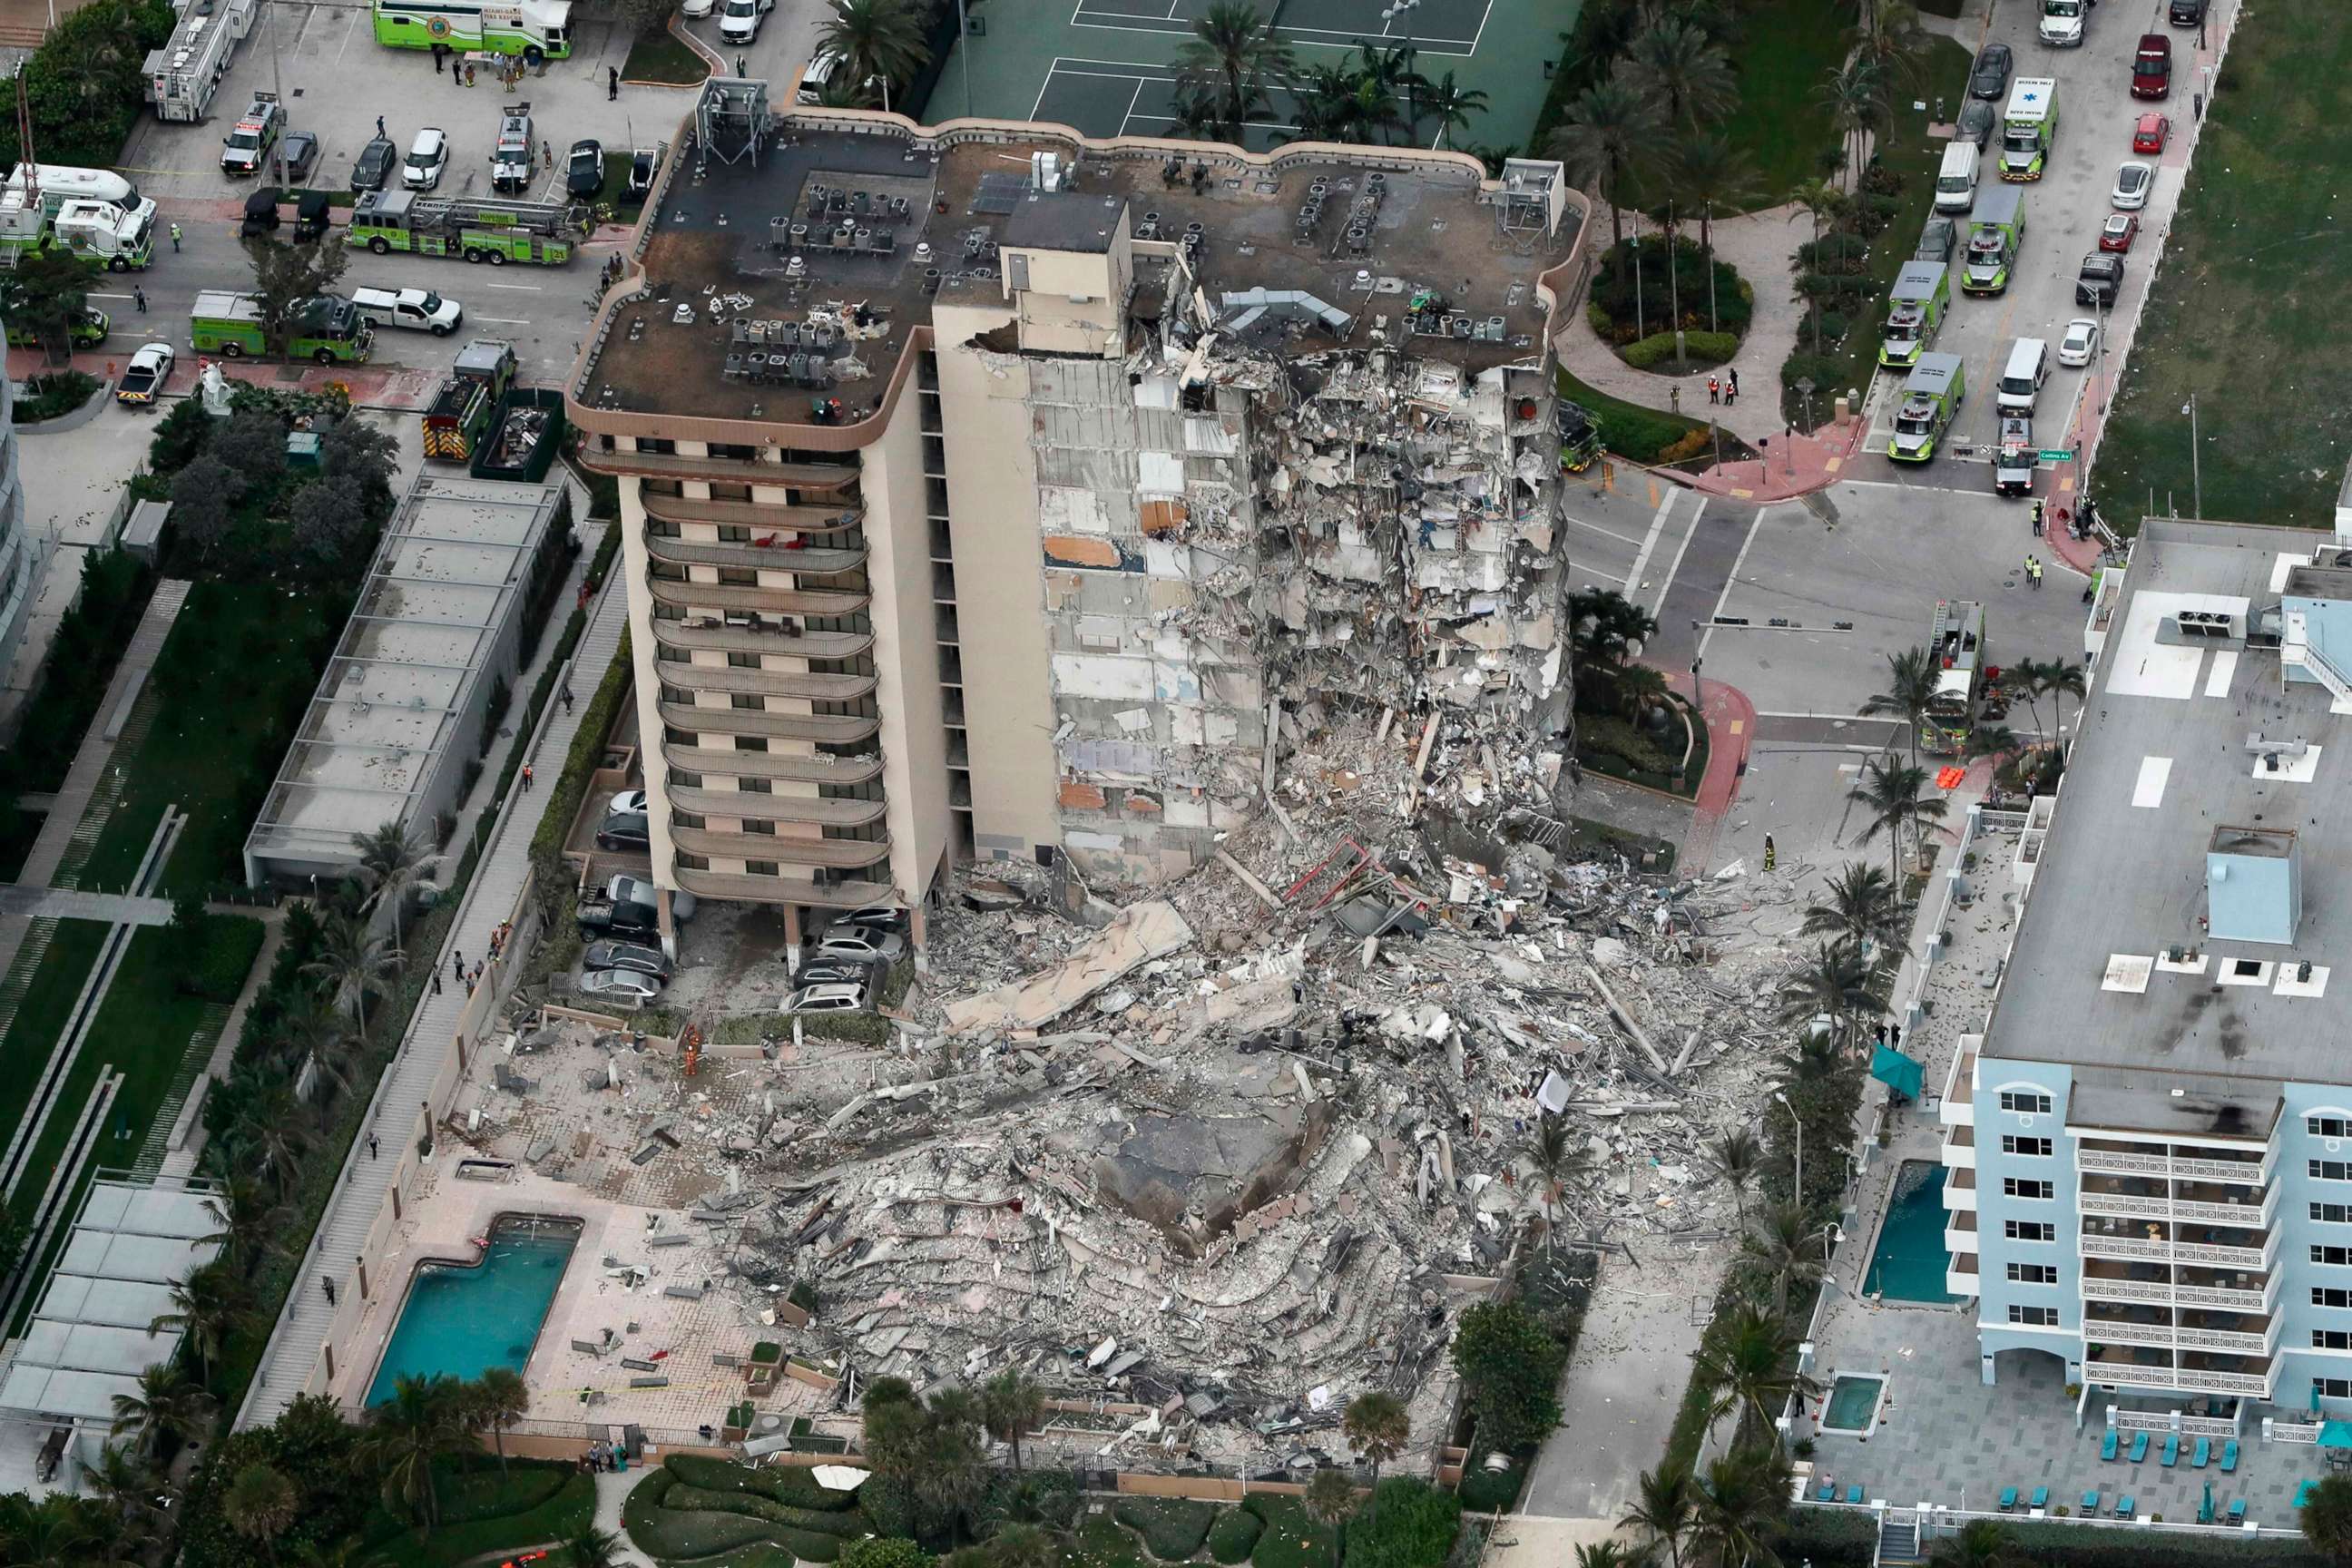 PHOTO: Debris fills the lot where the 12-story oceanfront Champlain Towers South Condo collapsed early Thursday, June 24, 2021 in Surfside, Fla., about 6 miles north of Miami Beach.